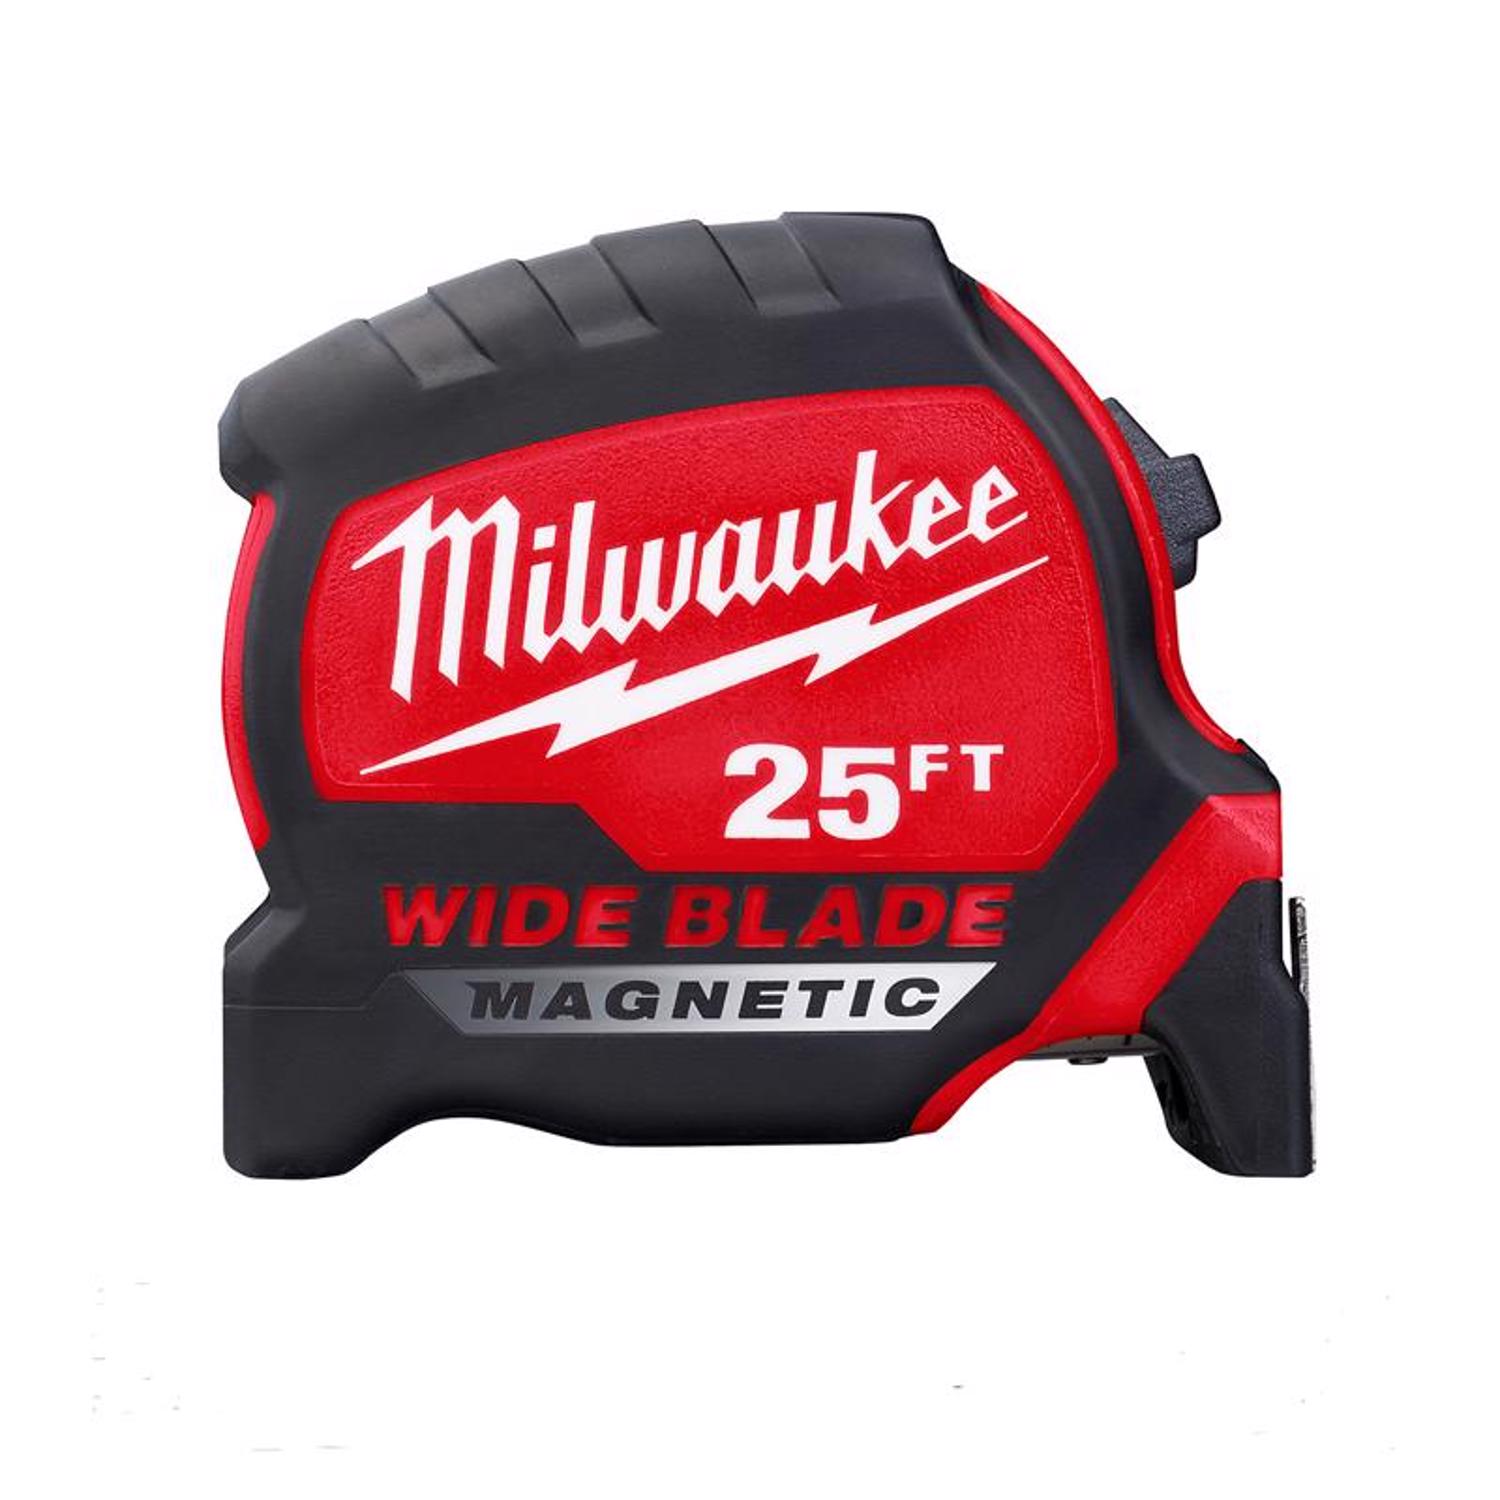 Photos - Tape Measure and Surveyor Tape Milwaukee 25 ft. L X 1-5/16 in. W Wide Blade Magnetic Tape Measure 1 pk 48 